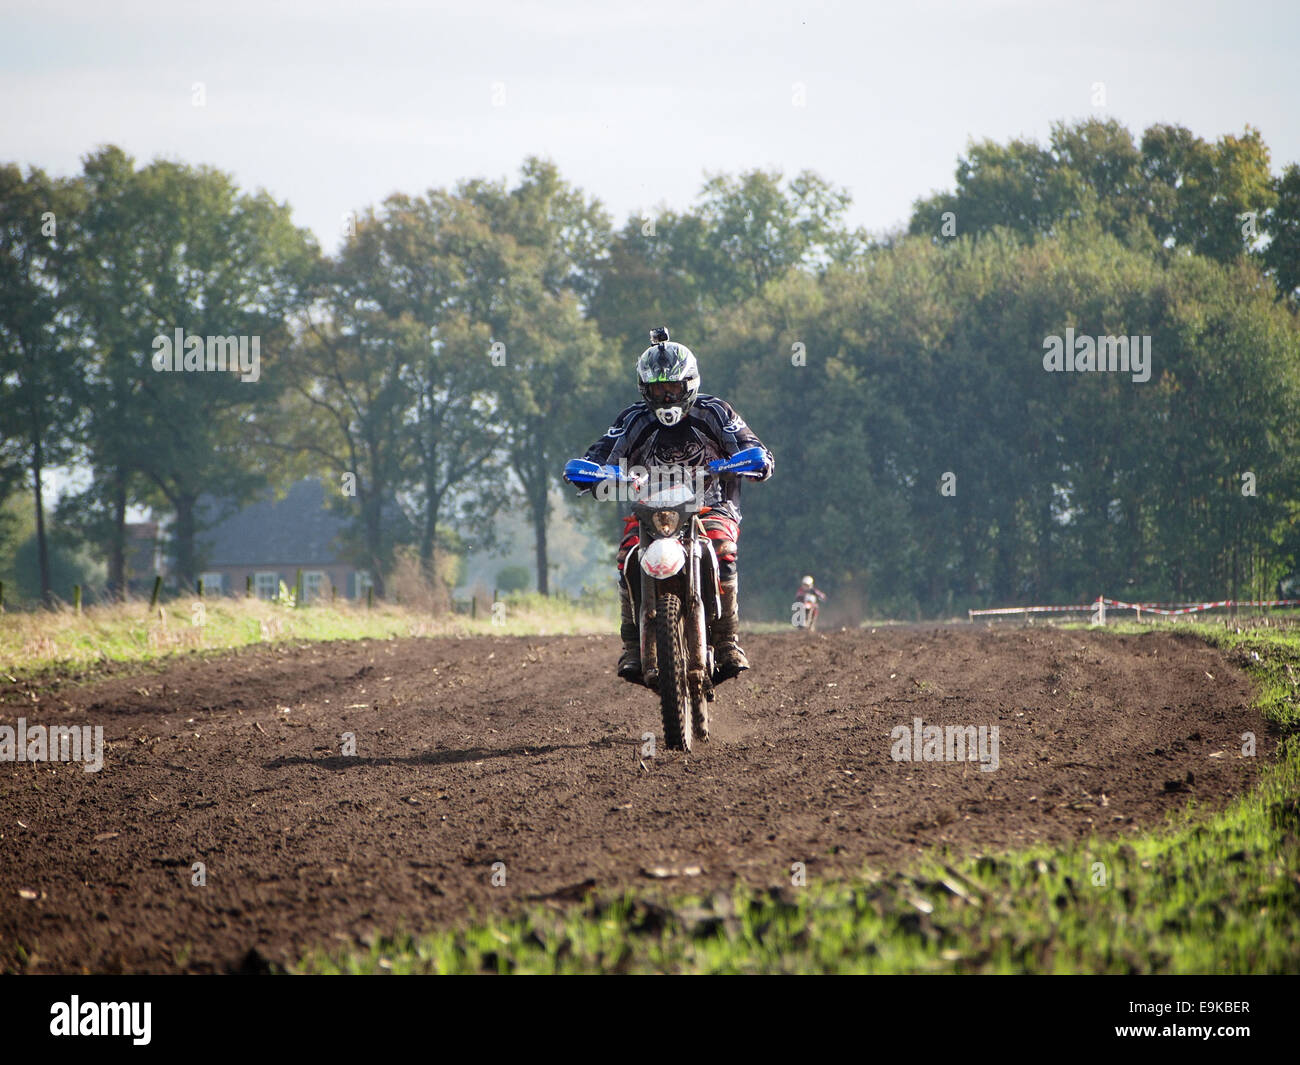 Enduro motorcyclist with Gopro camera on his helmet riding through a farm field in Ruurlo, the Netherlands. Stock Photo